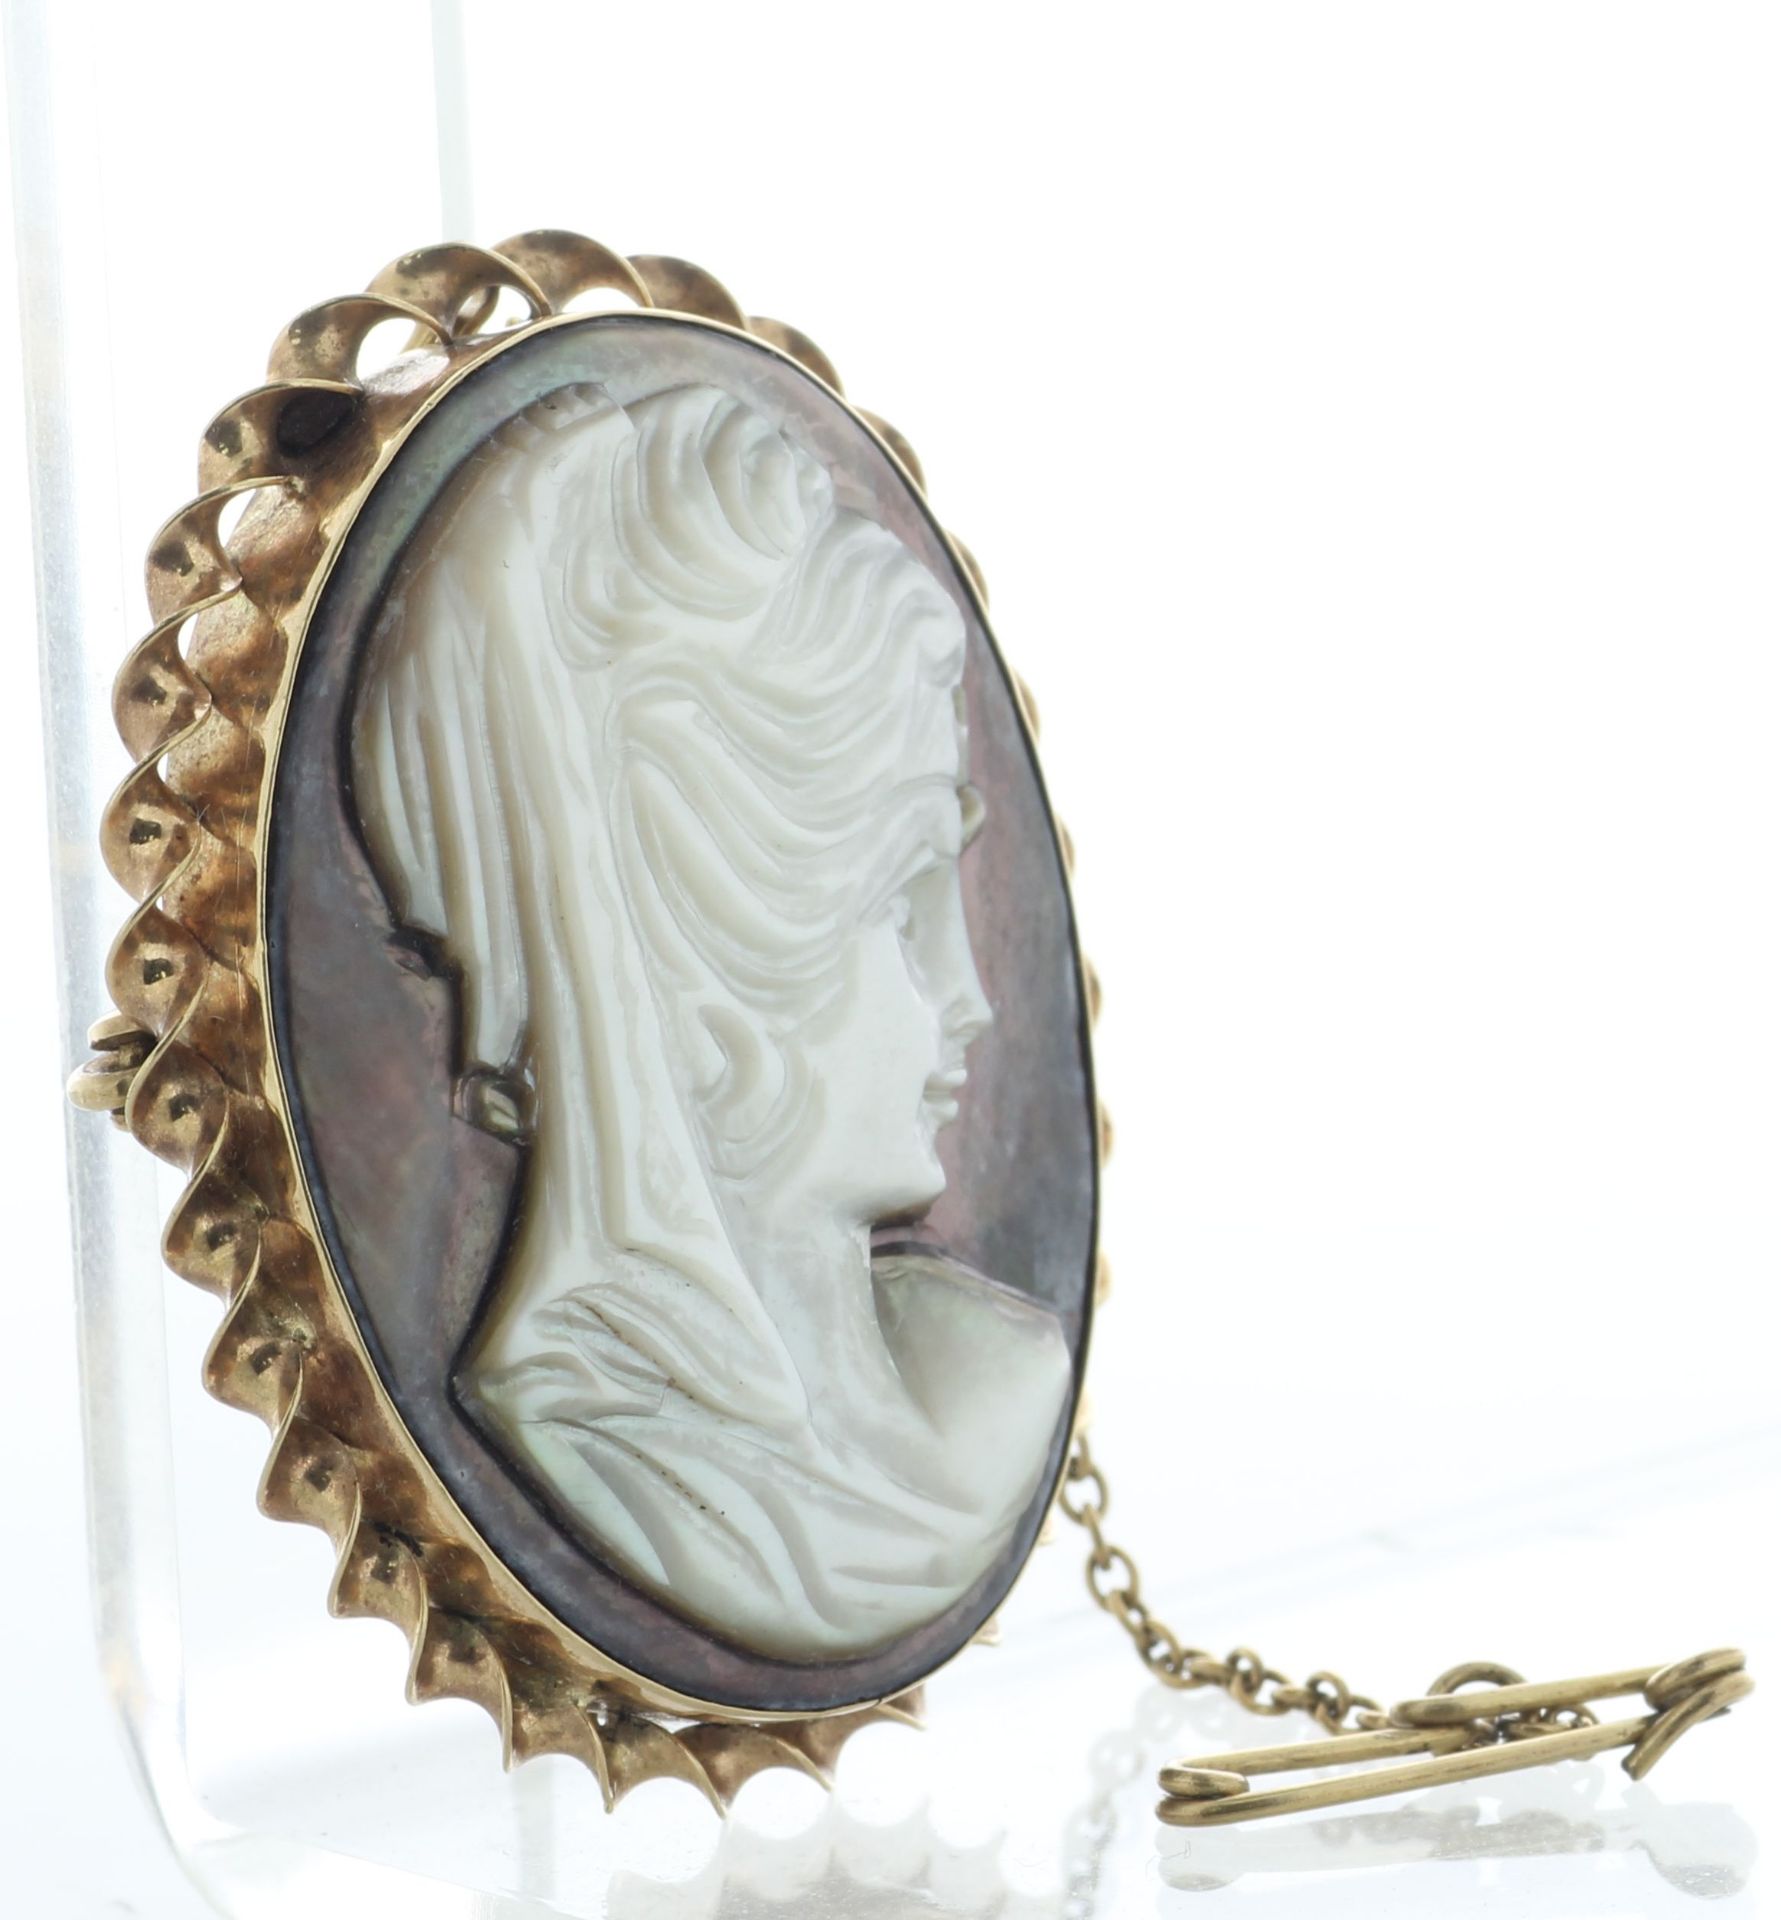 10ct yellow Gold Onyx Cameo Brooch - Valued By AGI £4,995.00 - 10c yellow gold cameo brooch, - Image 2 of 4